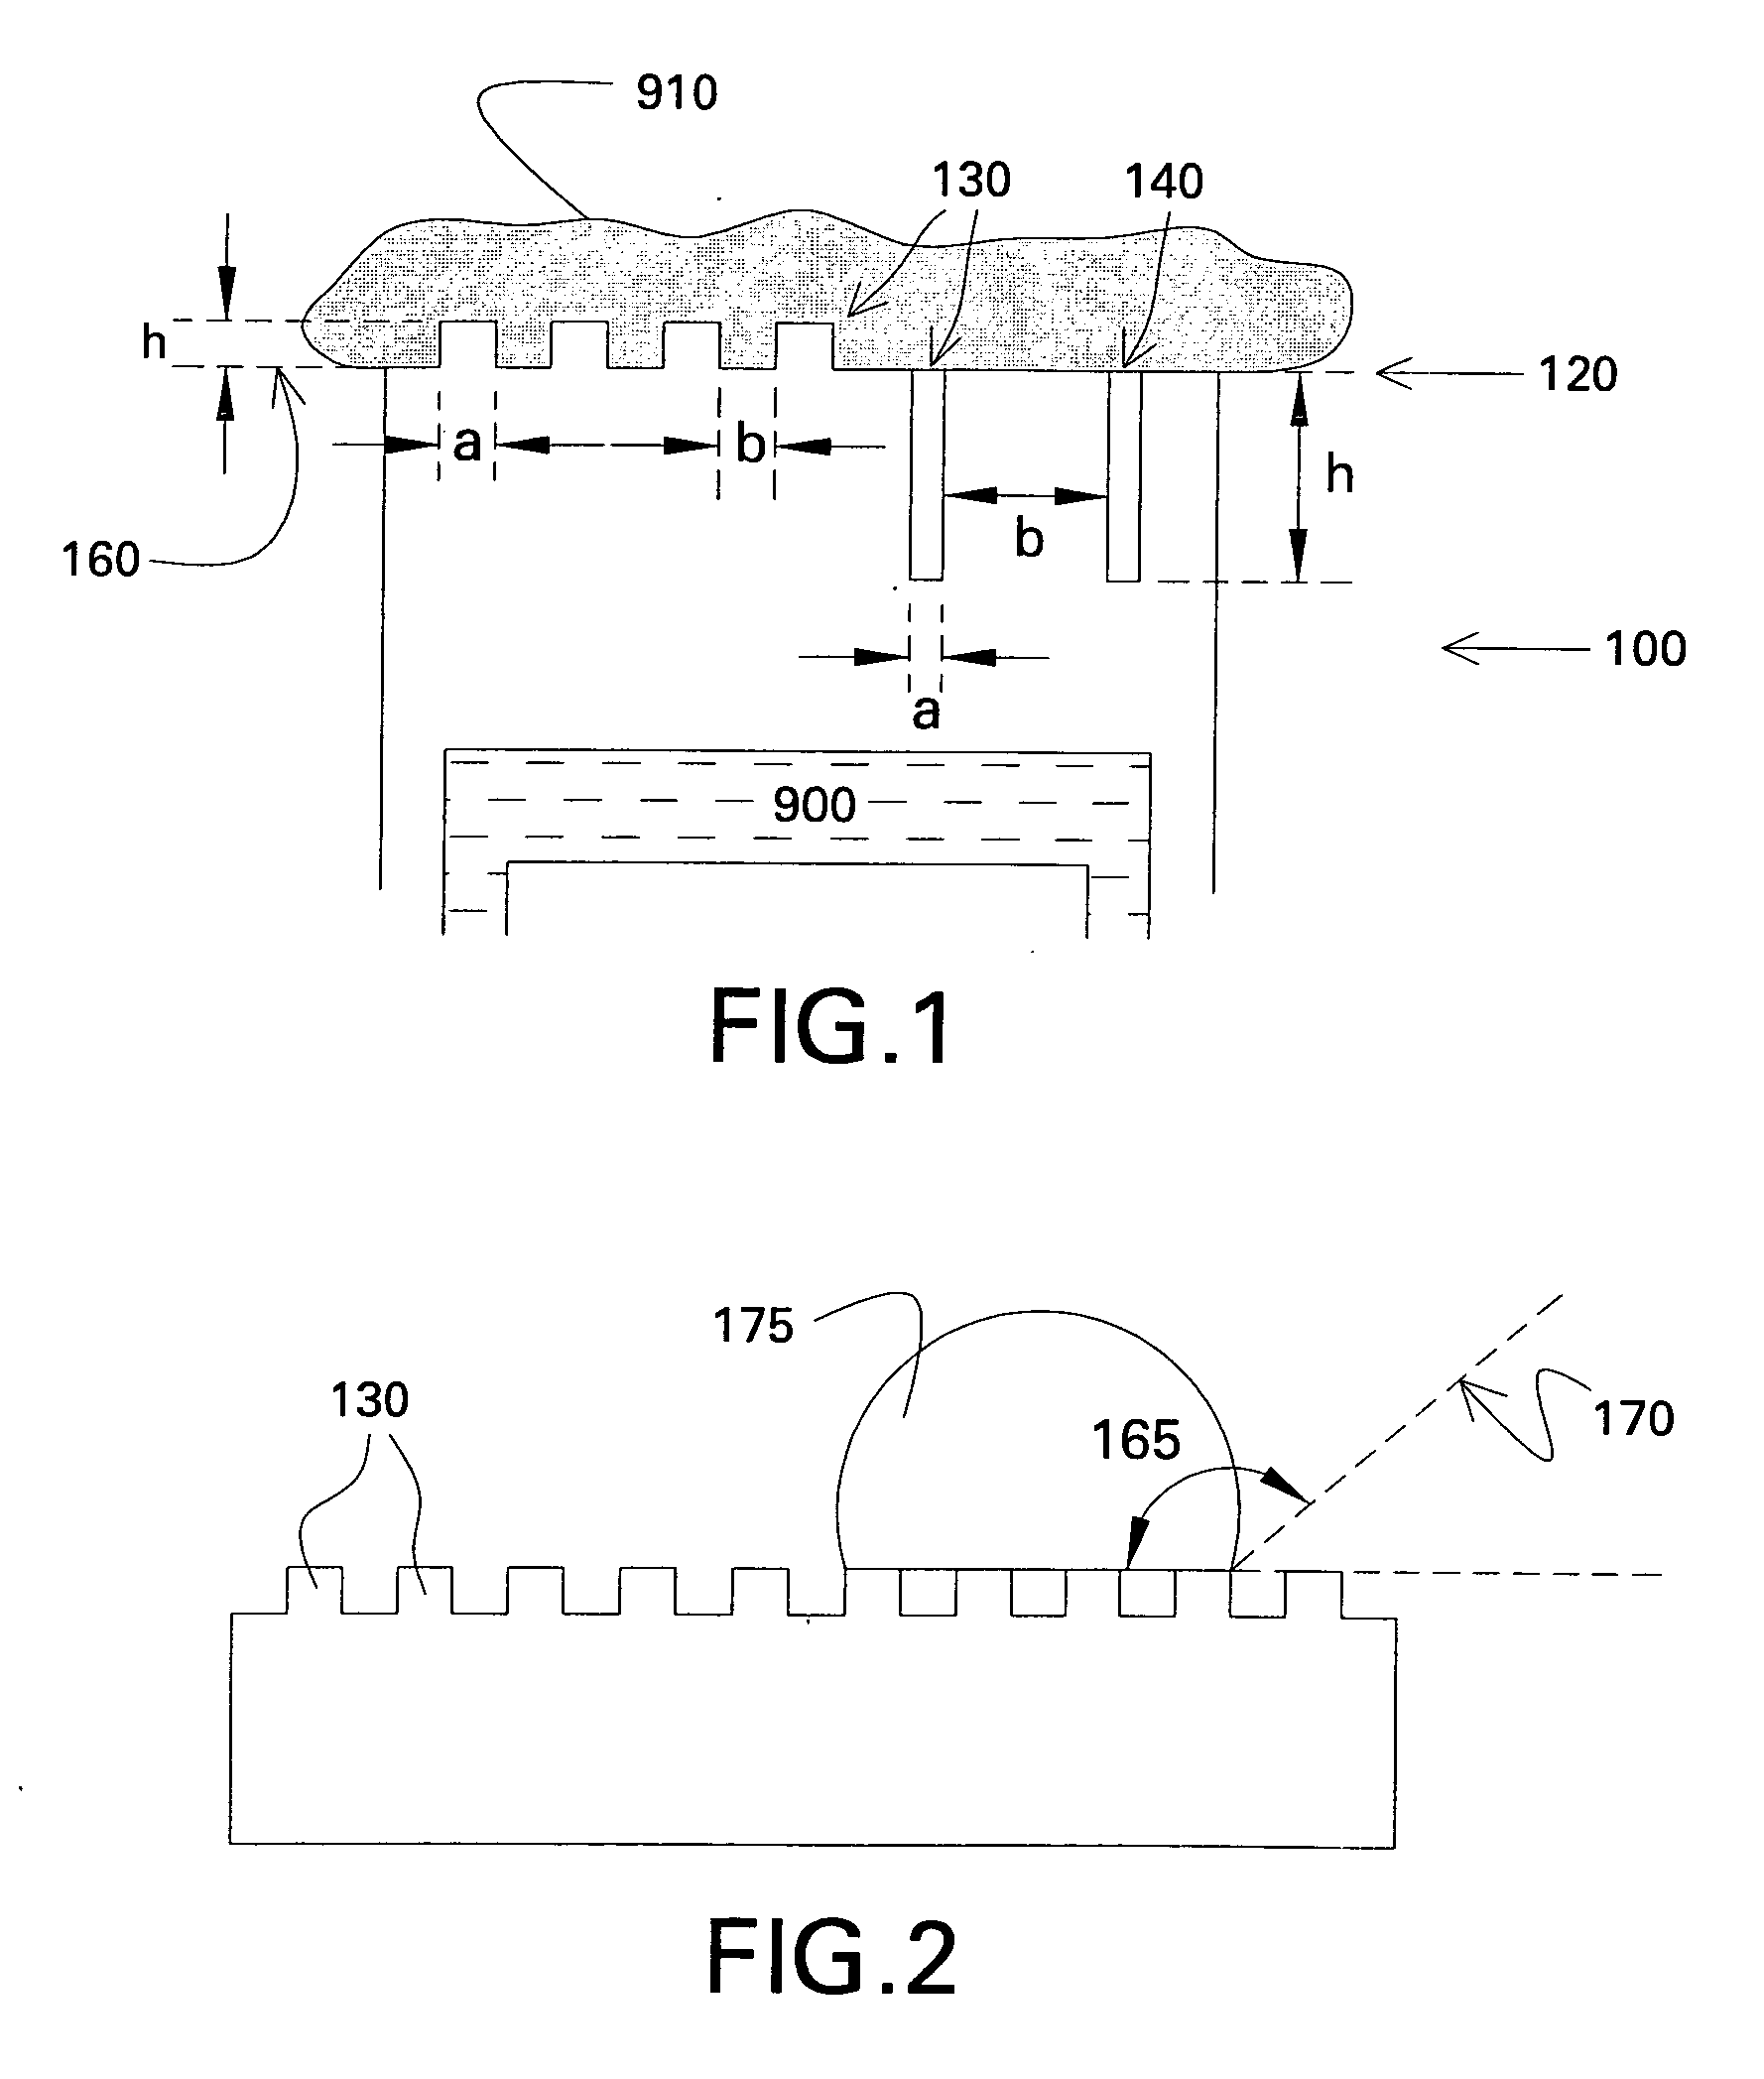 Heat transfer apparatus and systems including the apparatus